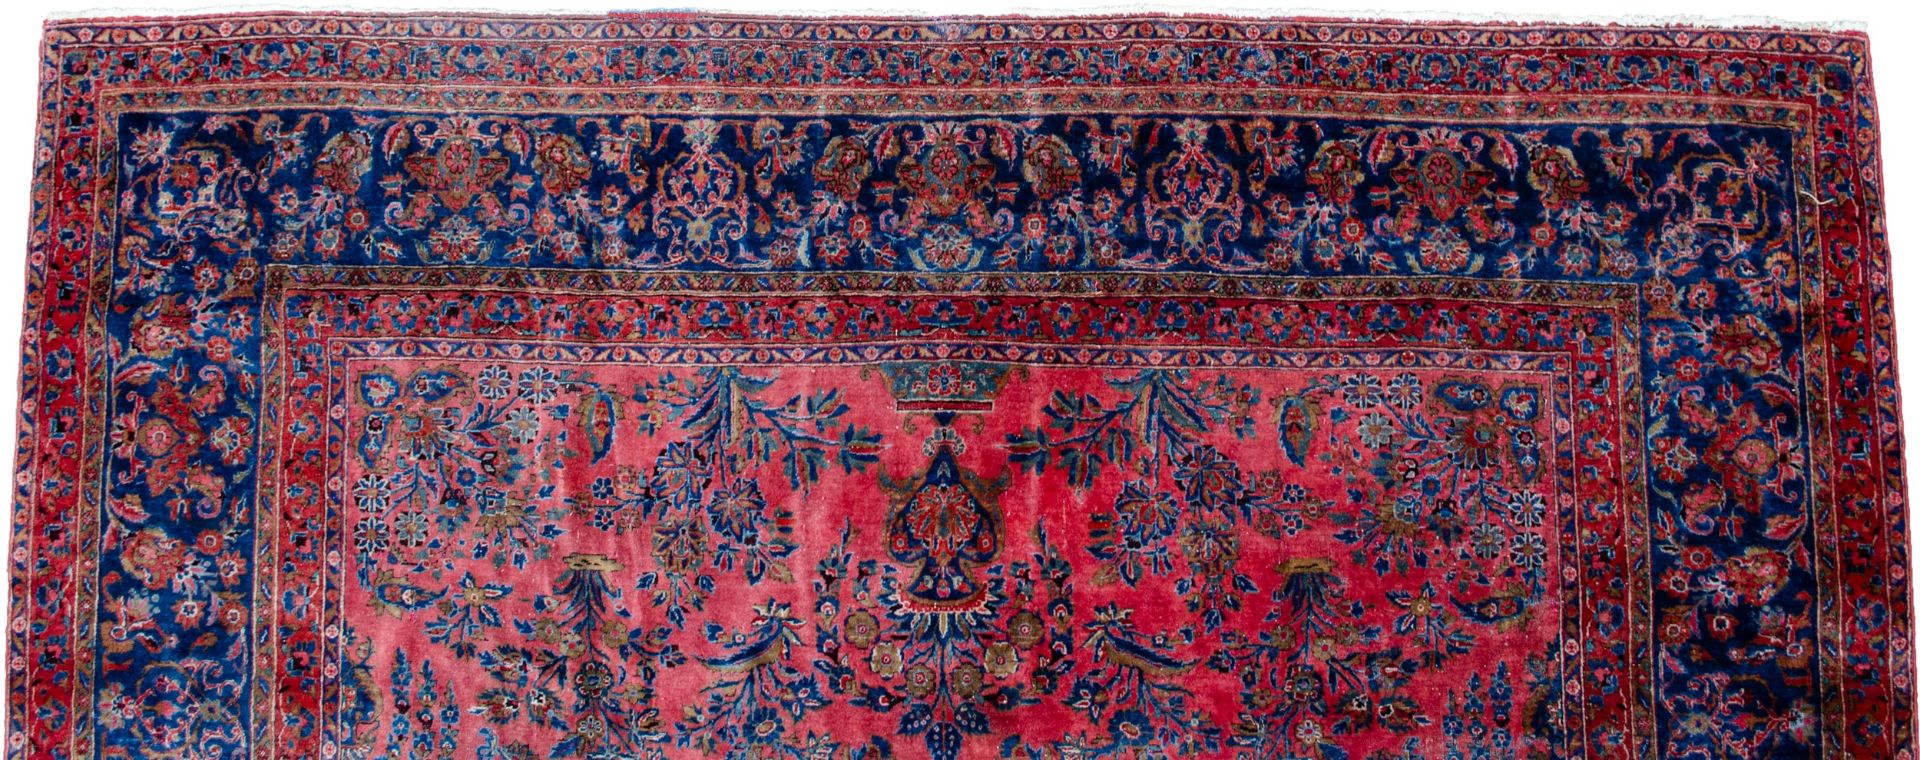 A Kashan carpet, Central Persia, 19th century - Image 5 of 7